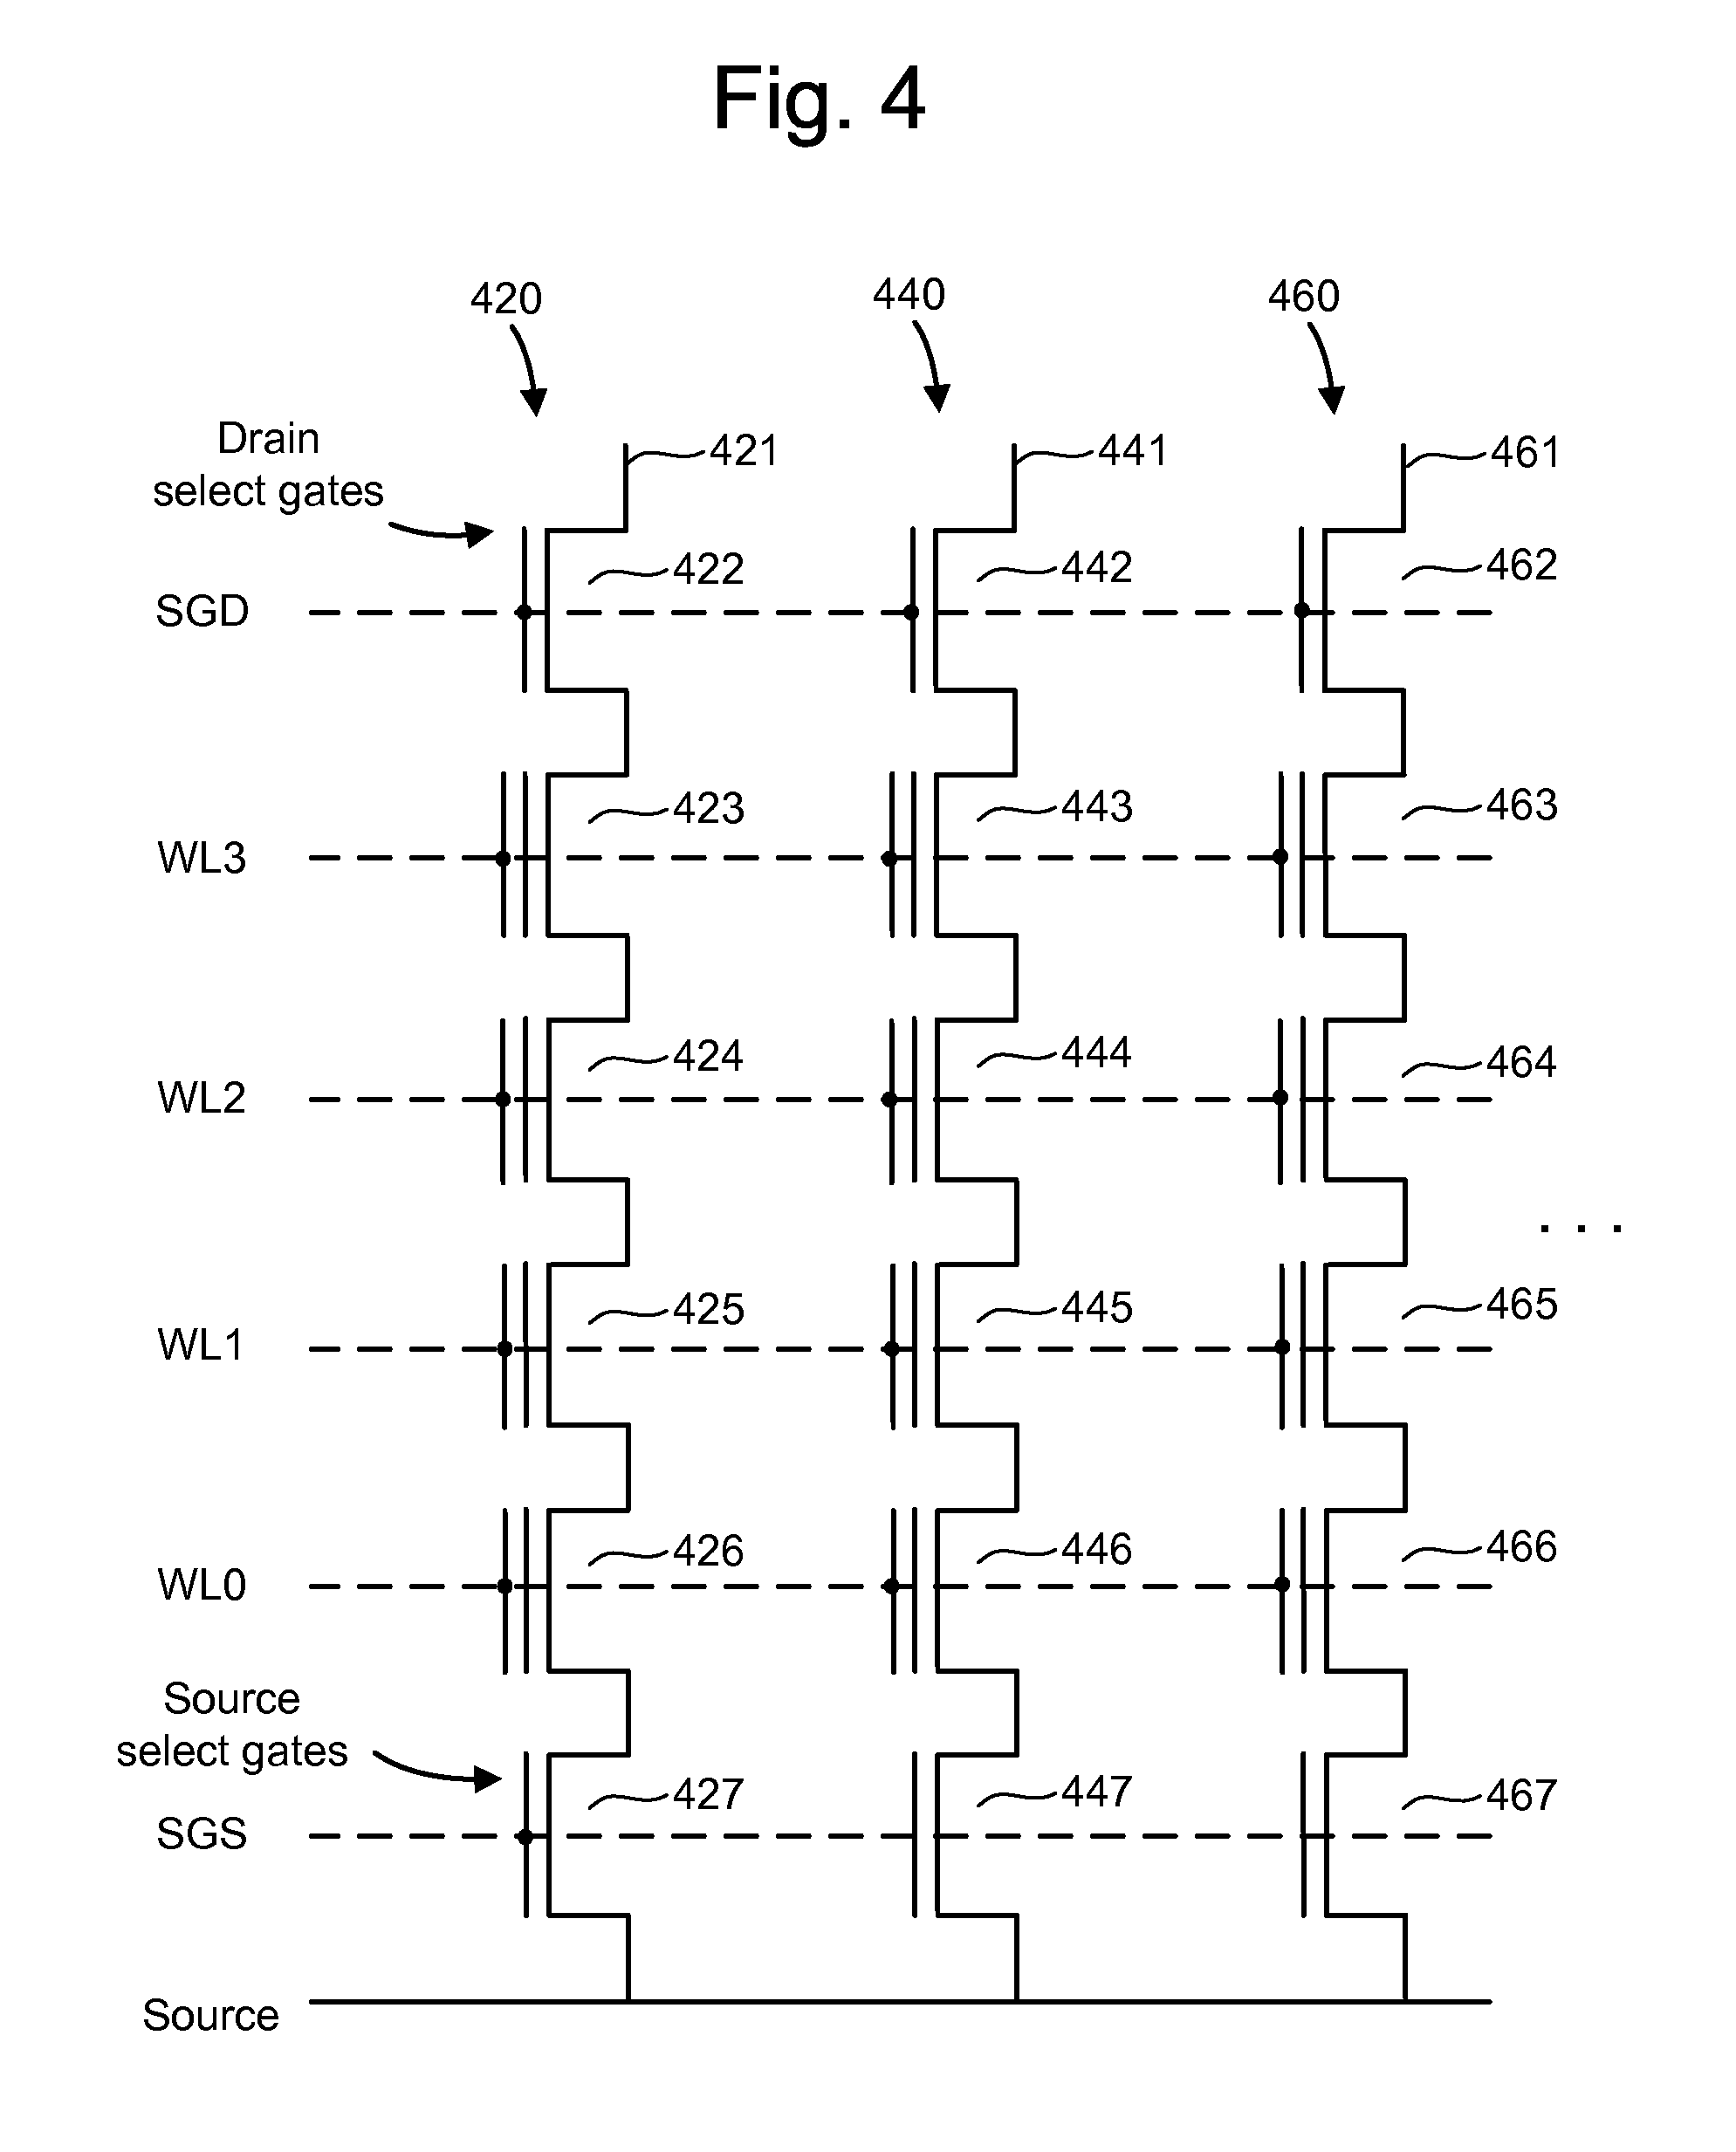 Memory device with power noise minimization during sensing